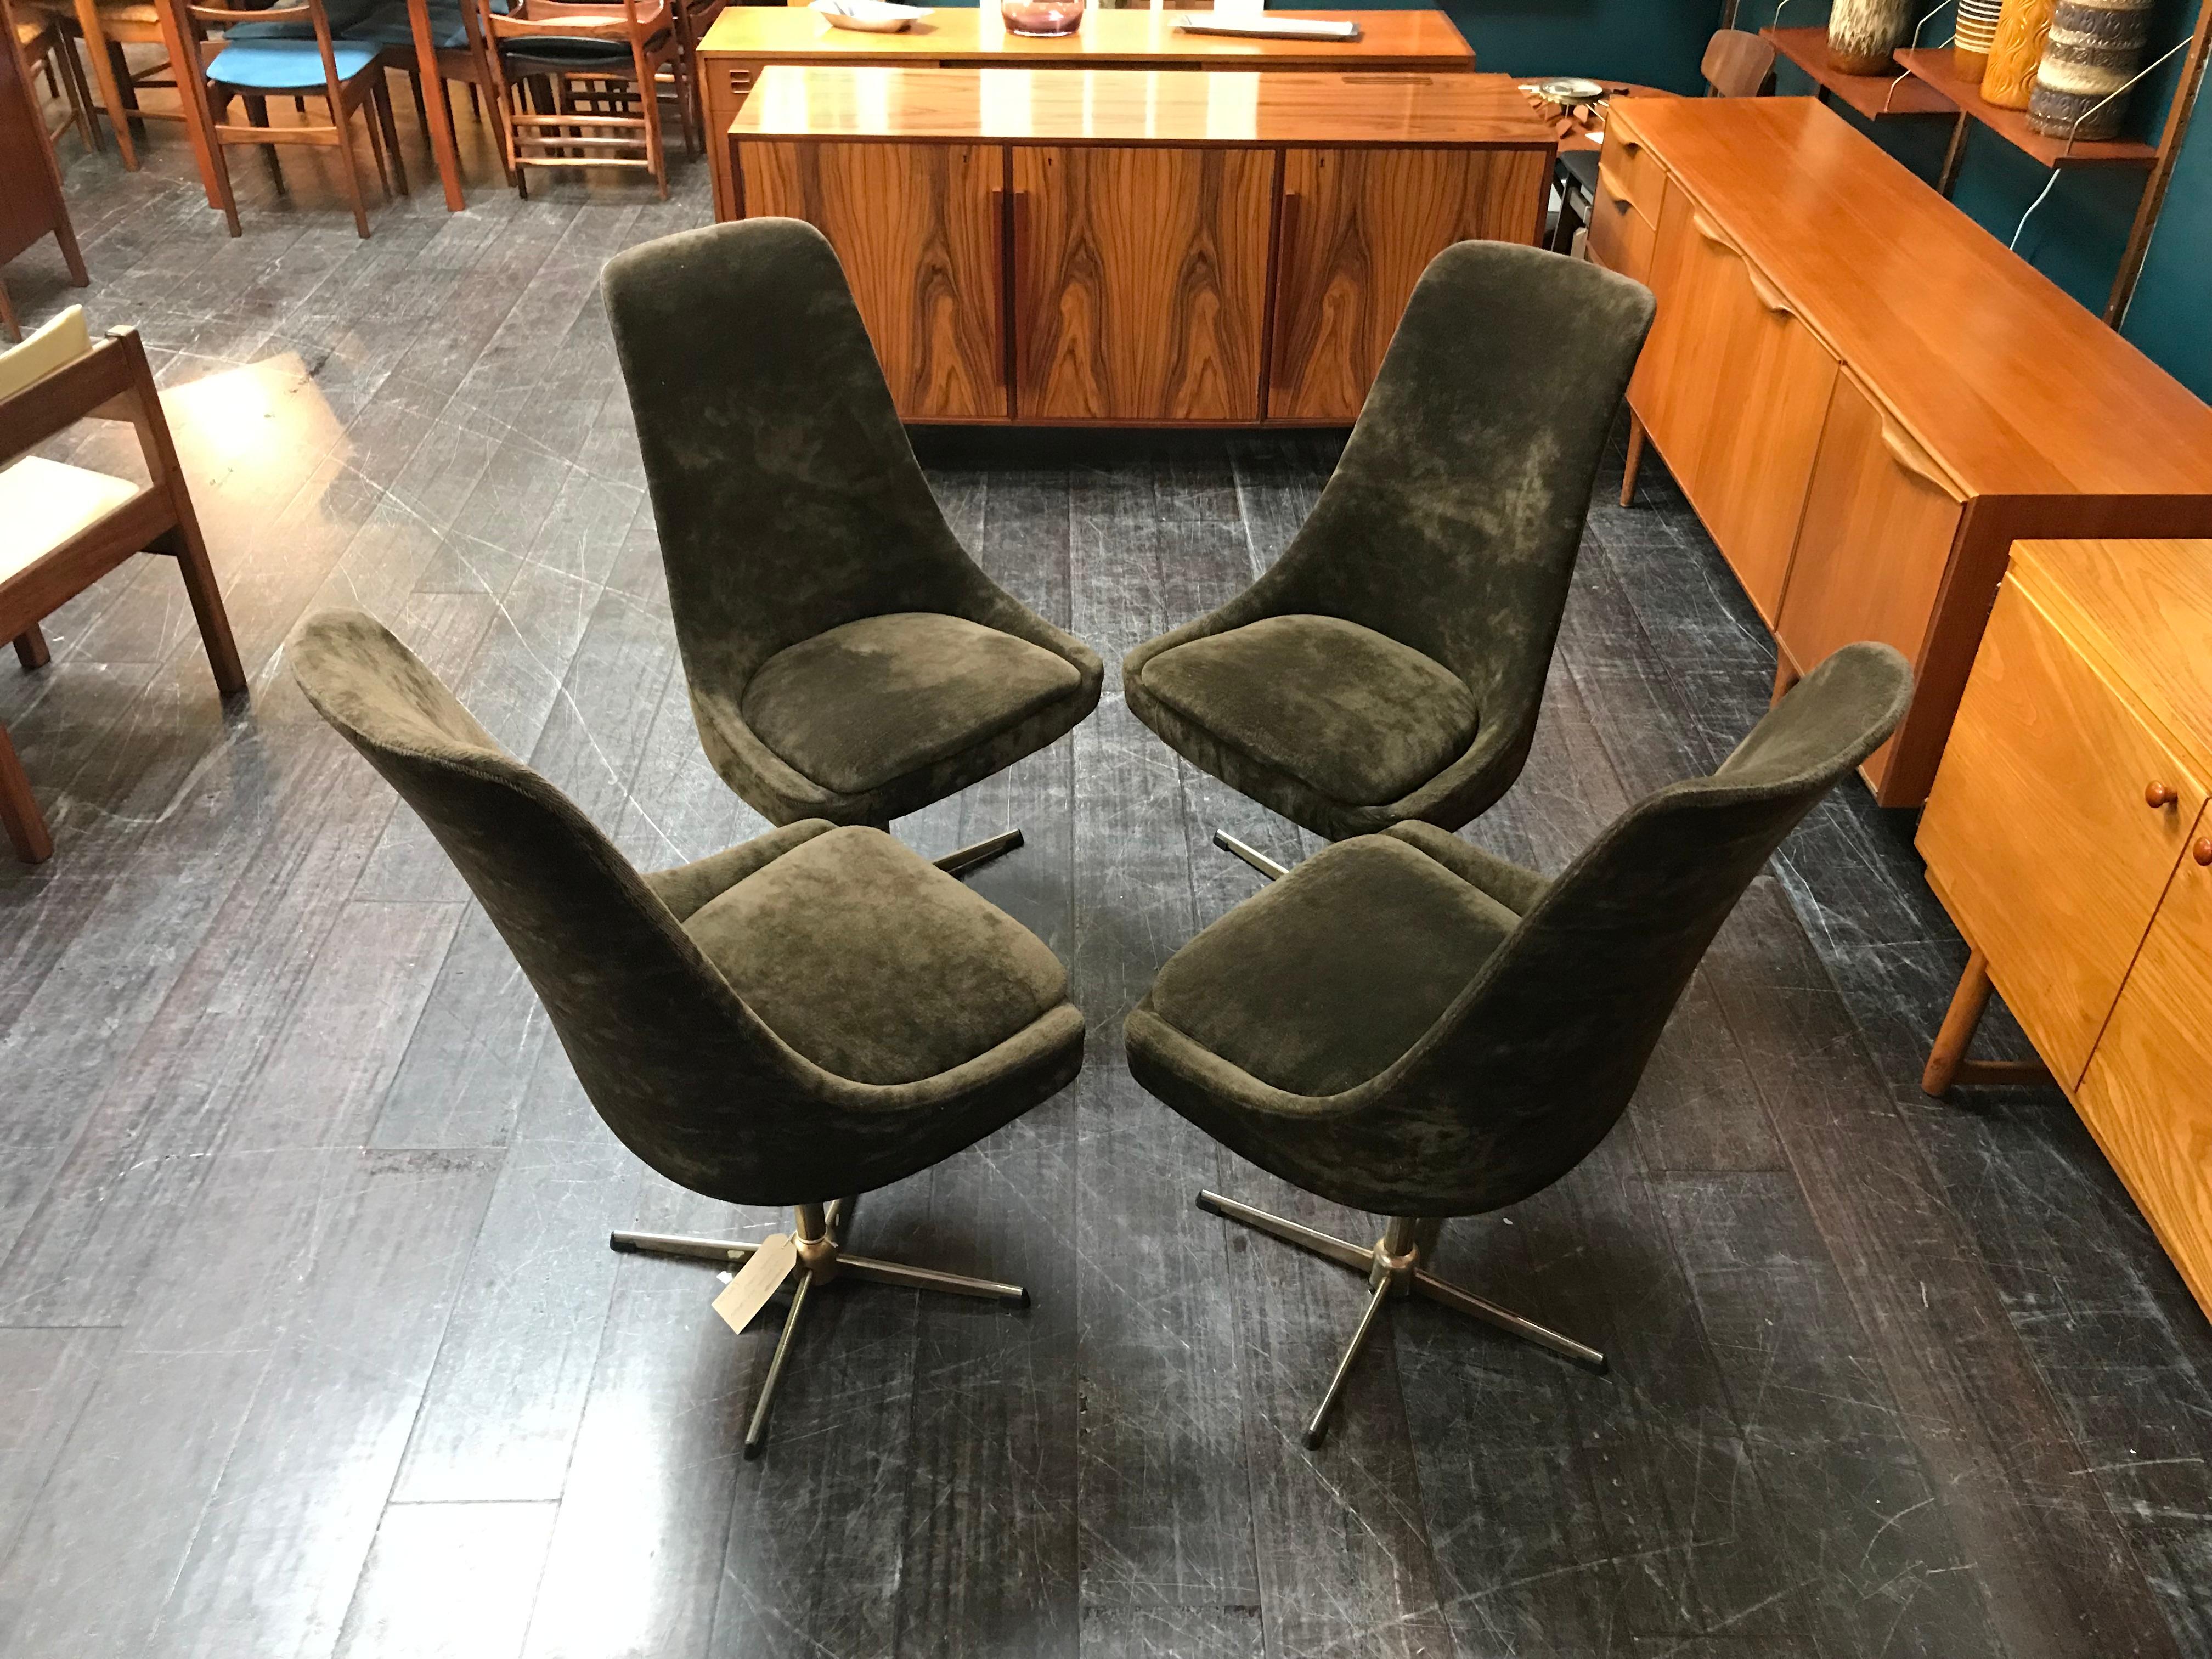 A set of super-funky midcentury swivel chairs in brown velour. This very stylish set are typical of the style and design from the post-war era. The chairs sit on polished brass plated ‘star’ bases, typical of high-end furniture from this period and